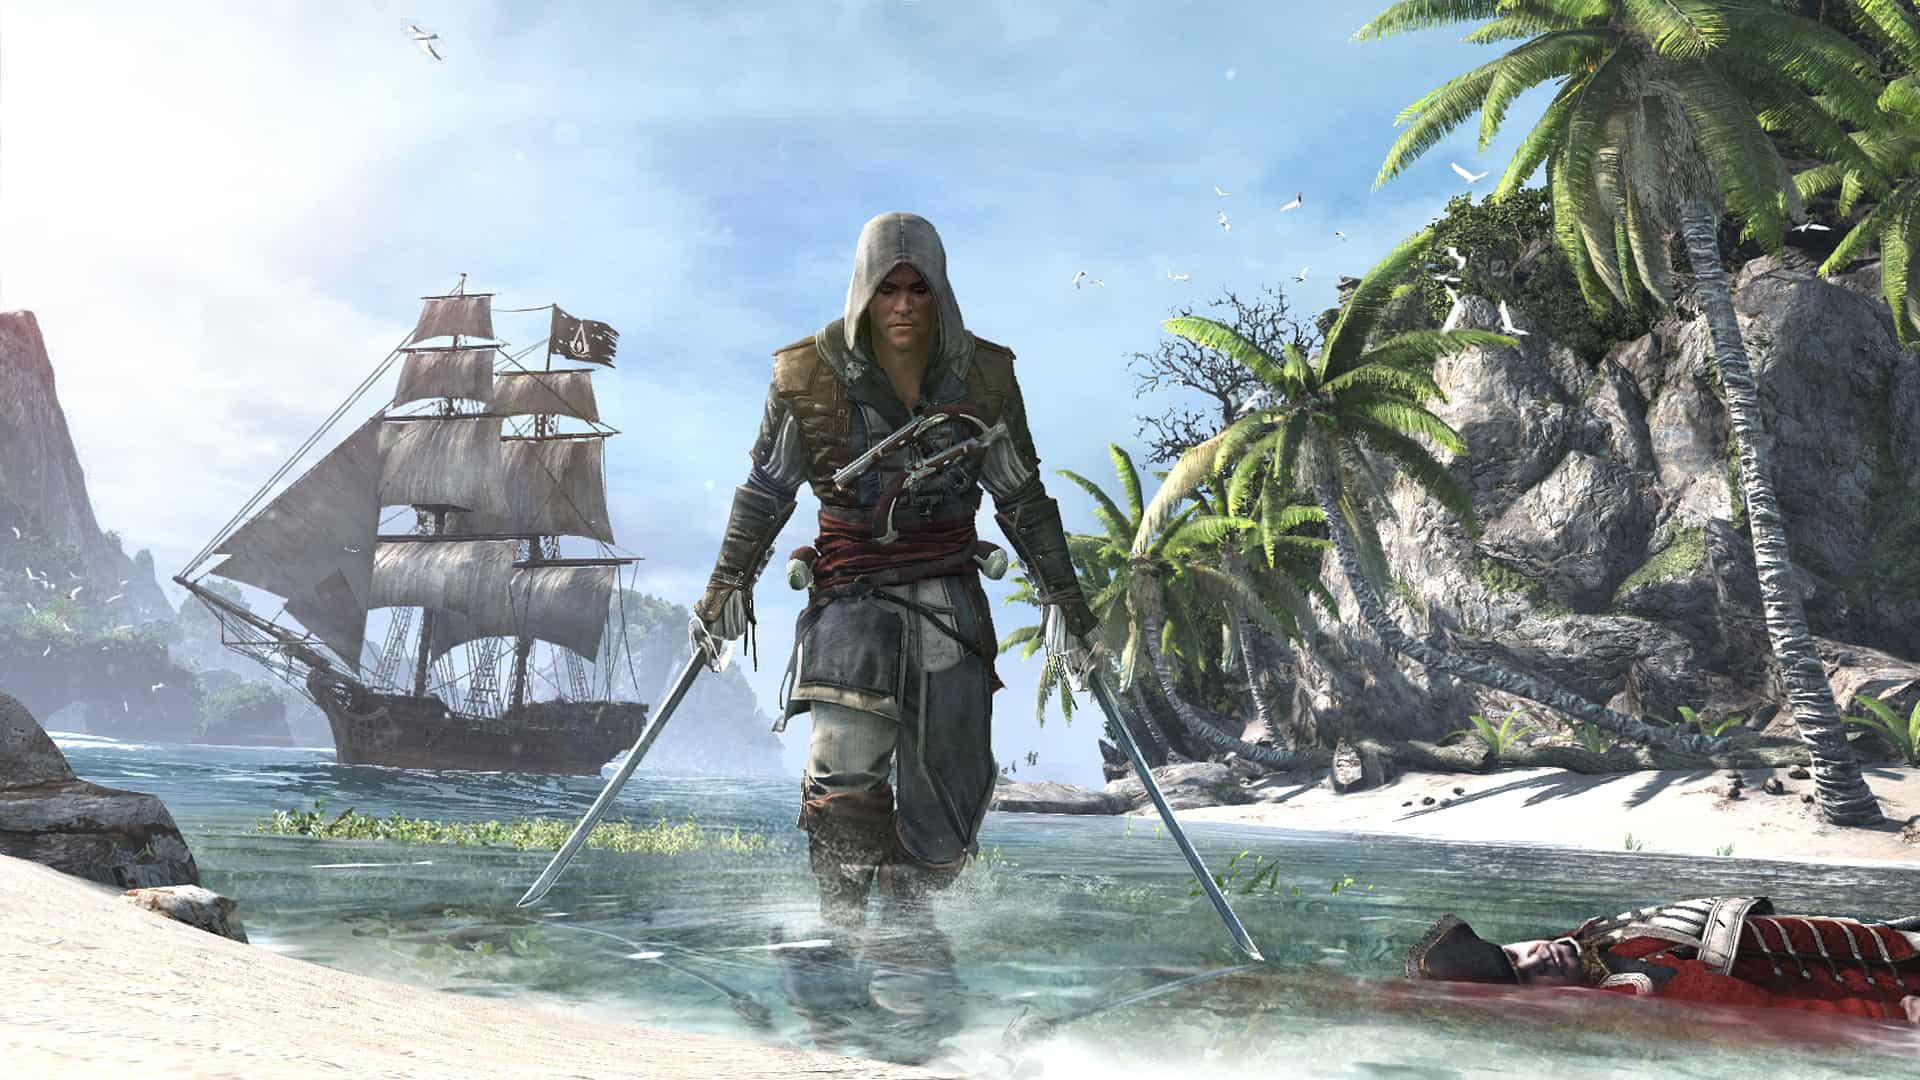 Edward Kenway emerging from the water in Assassin's Creed IV: Black Flag.